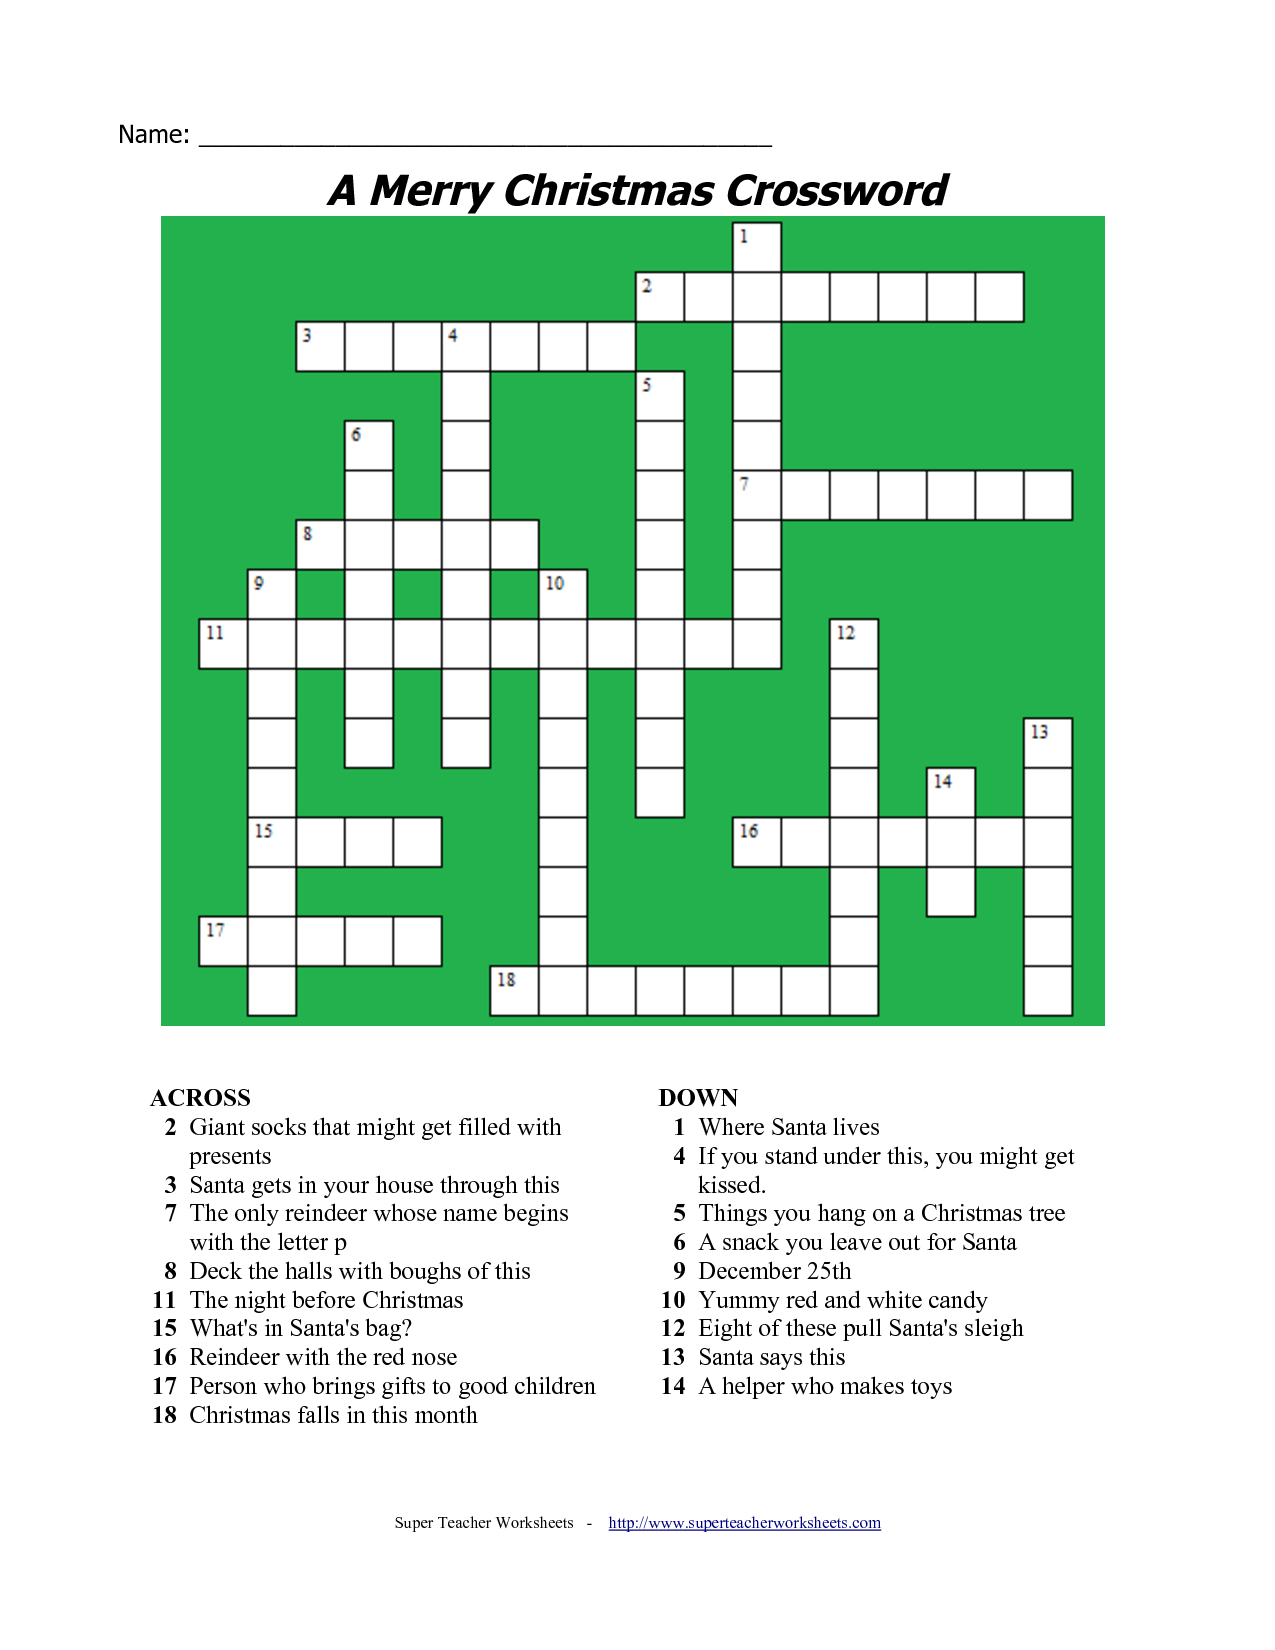 20 Fun Printable Christmas Crossword Puzzles | Kittybabylove - Printable Holiday Crossword Puzzles For Adults With Answers